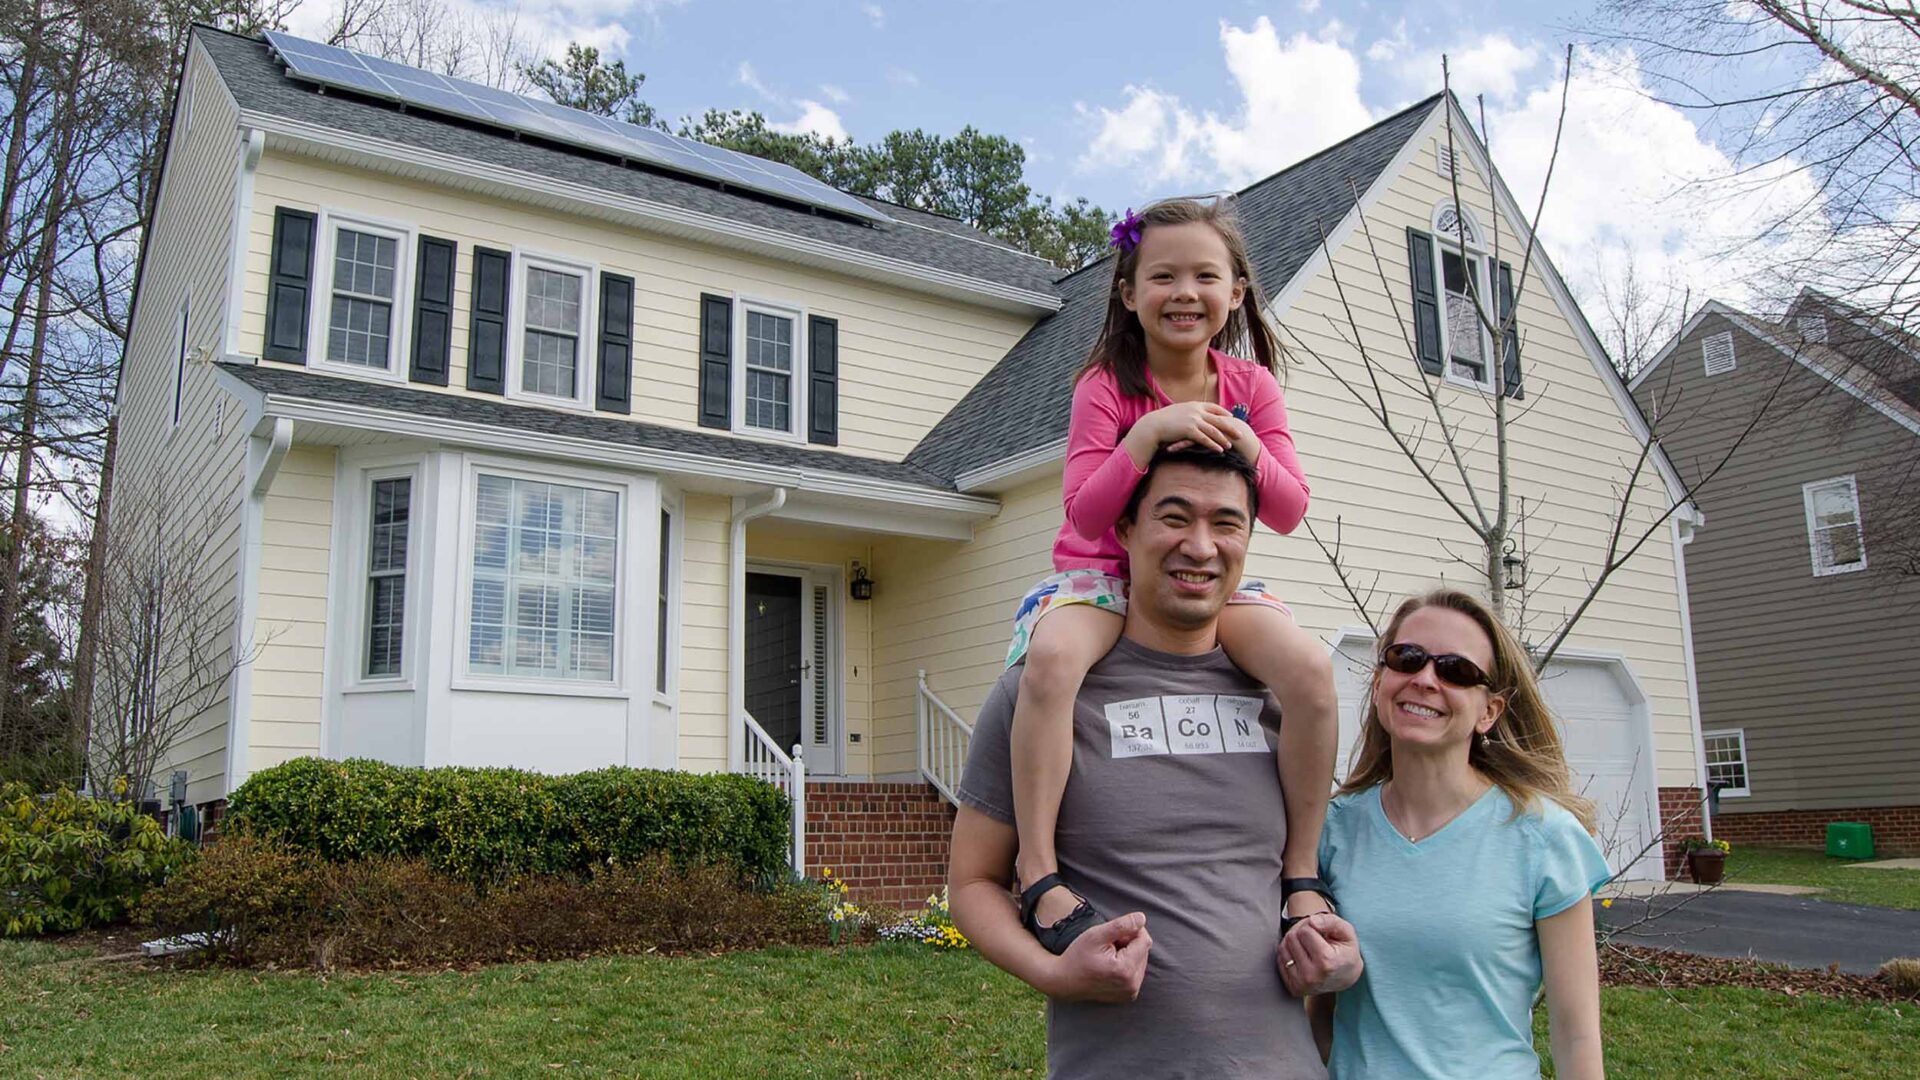 Family of husband, wife, and young daughter standing in front of house with solar panels on roof.